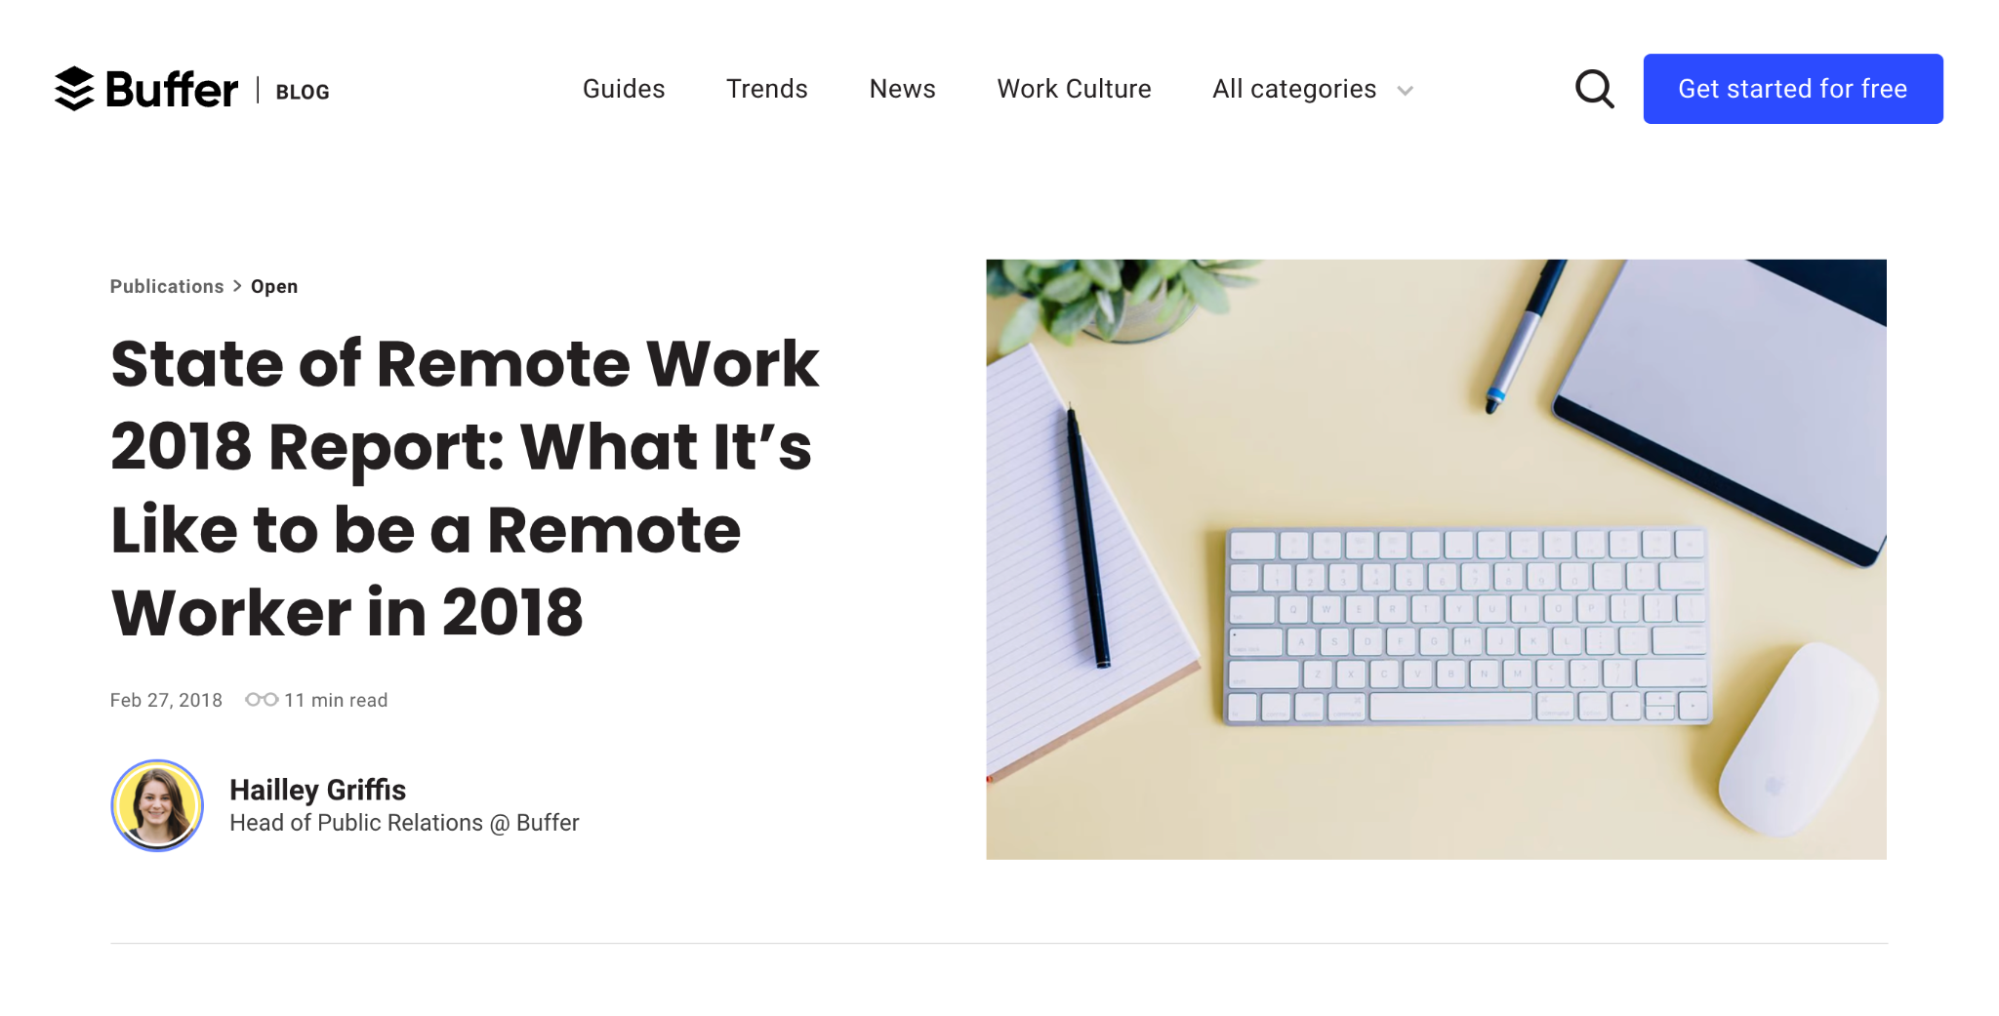 Buffer - State of Remote Work 2018 Report